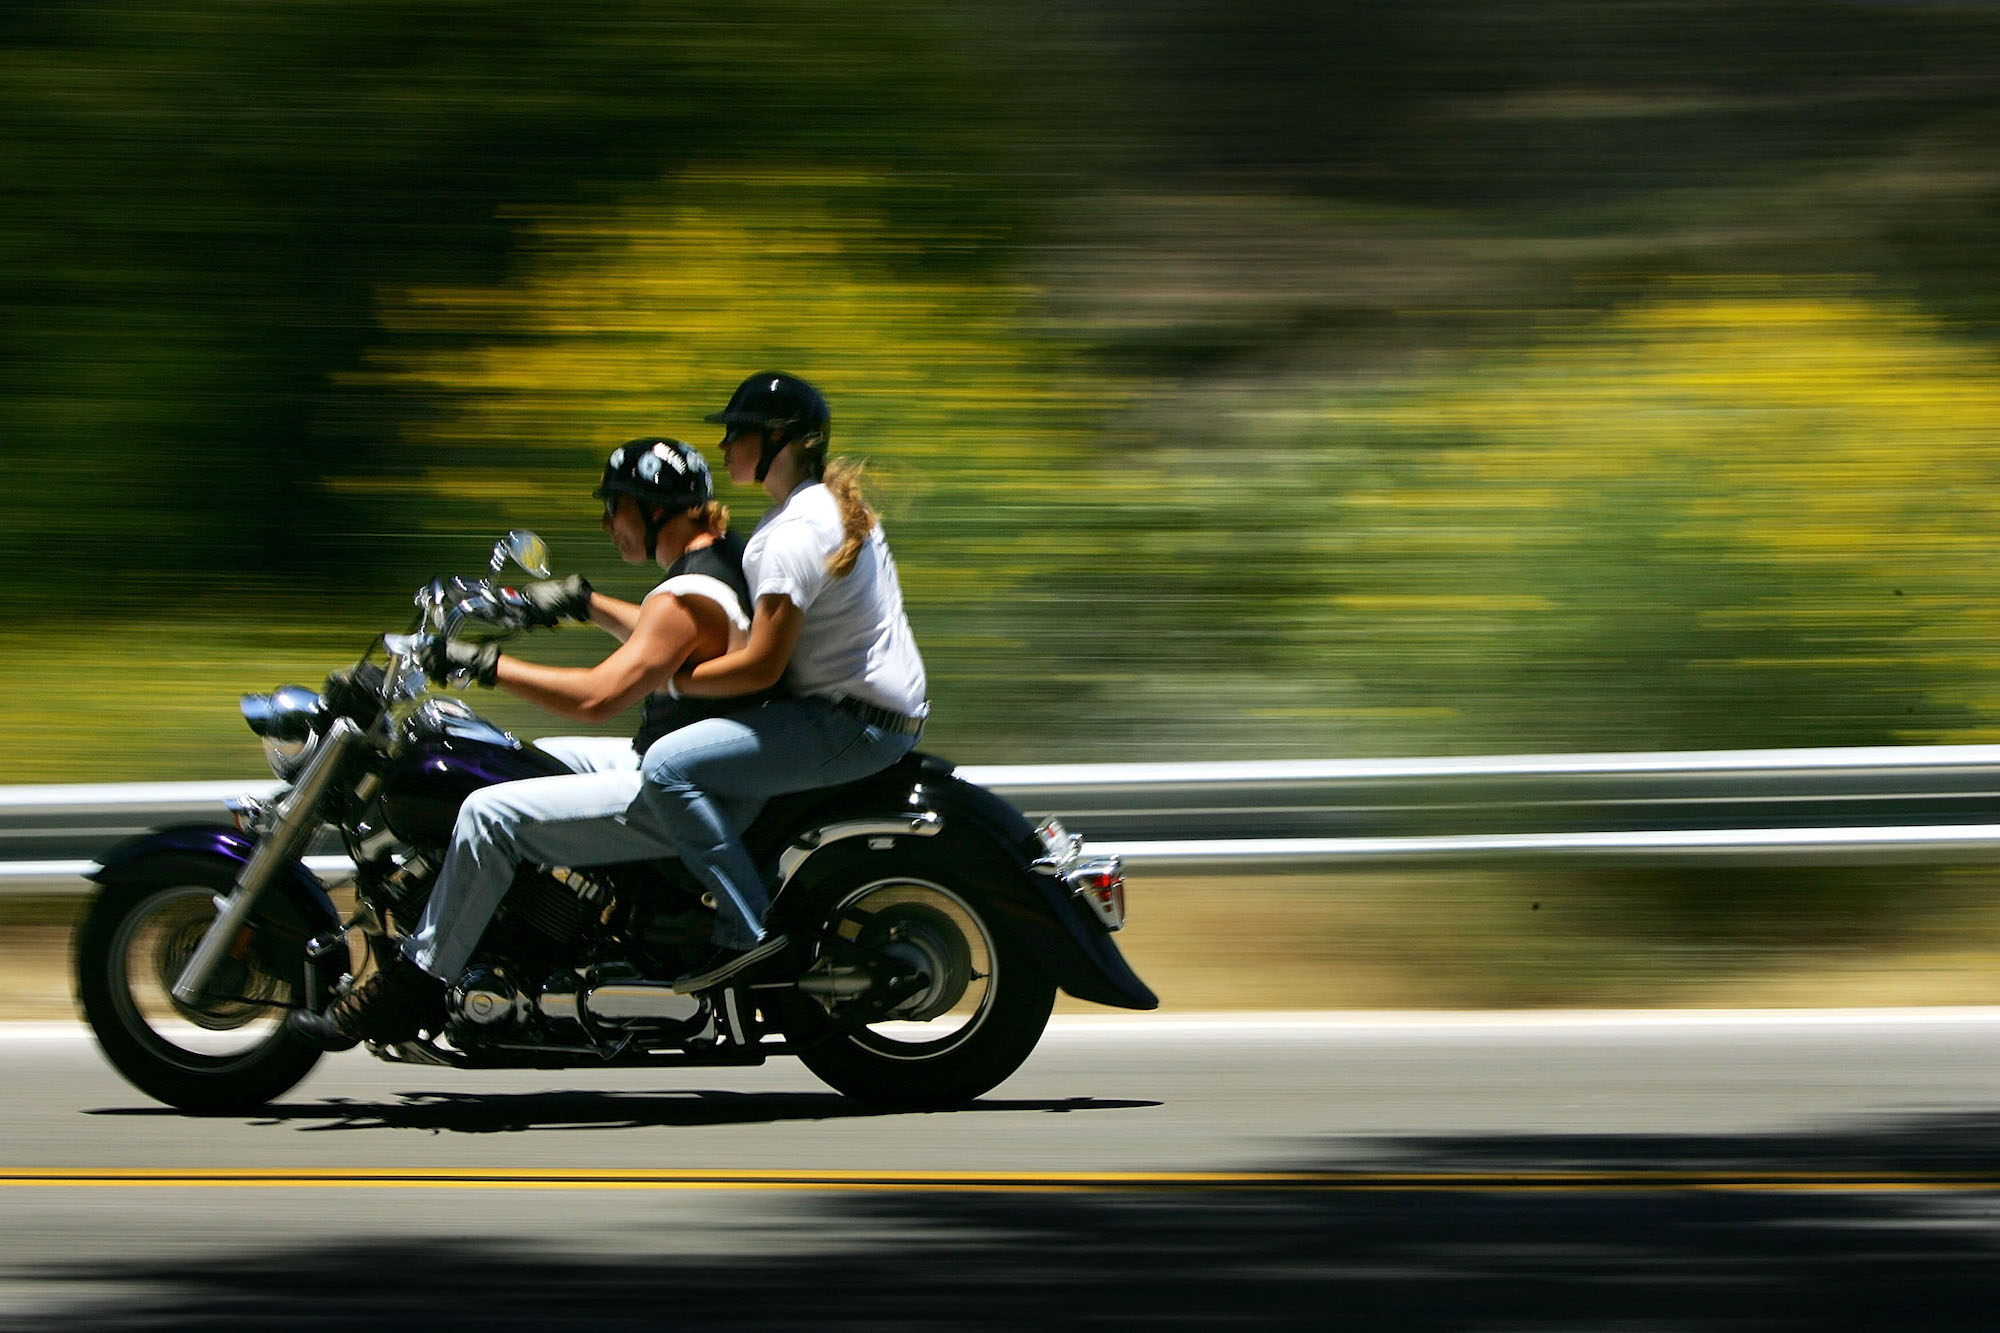 A motorcycle with two riders drives past wildflowers on the side of a road